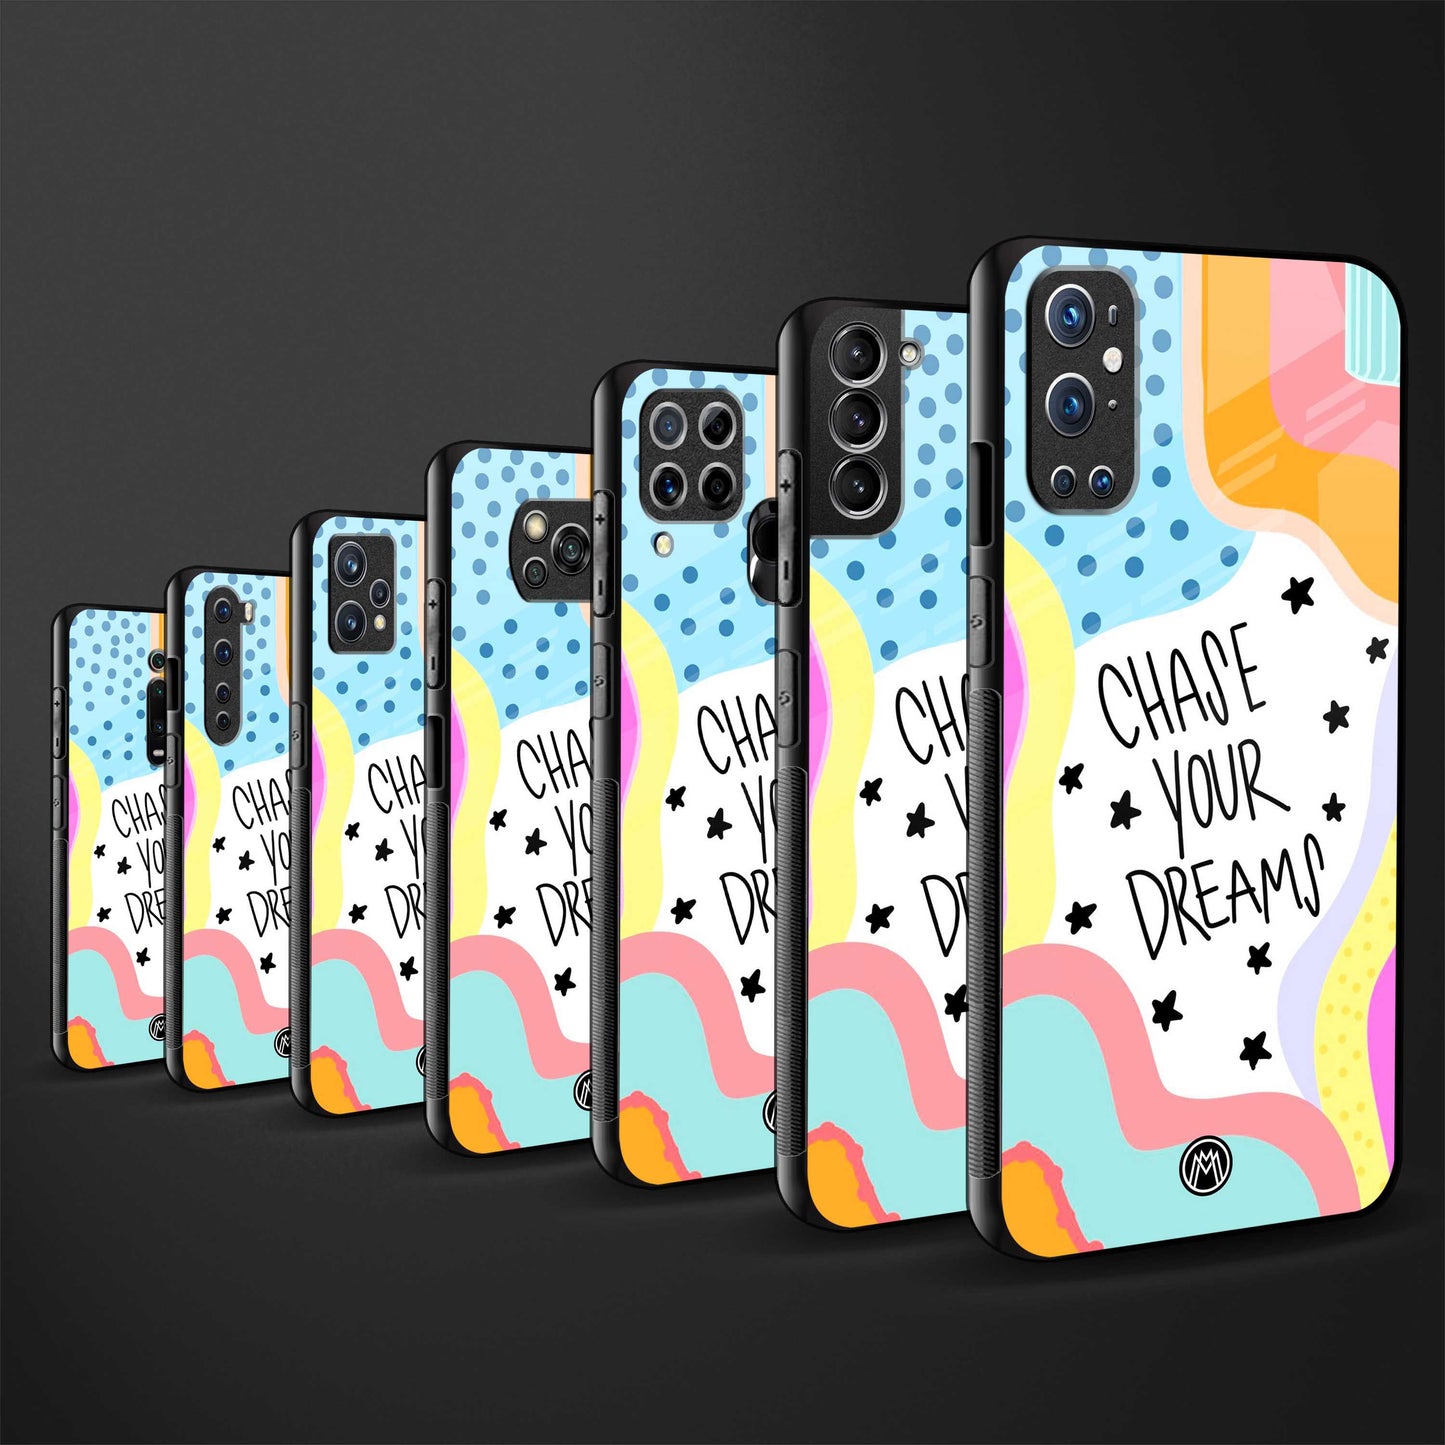 chase your dreams glass case for iphone 12 pro max image-3